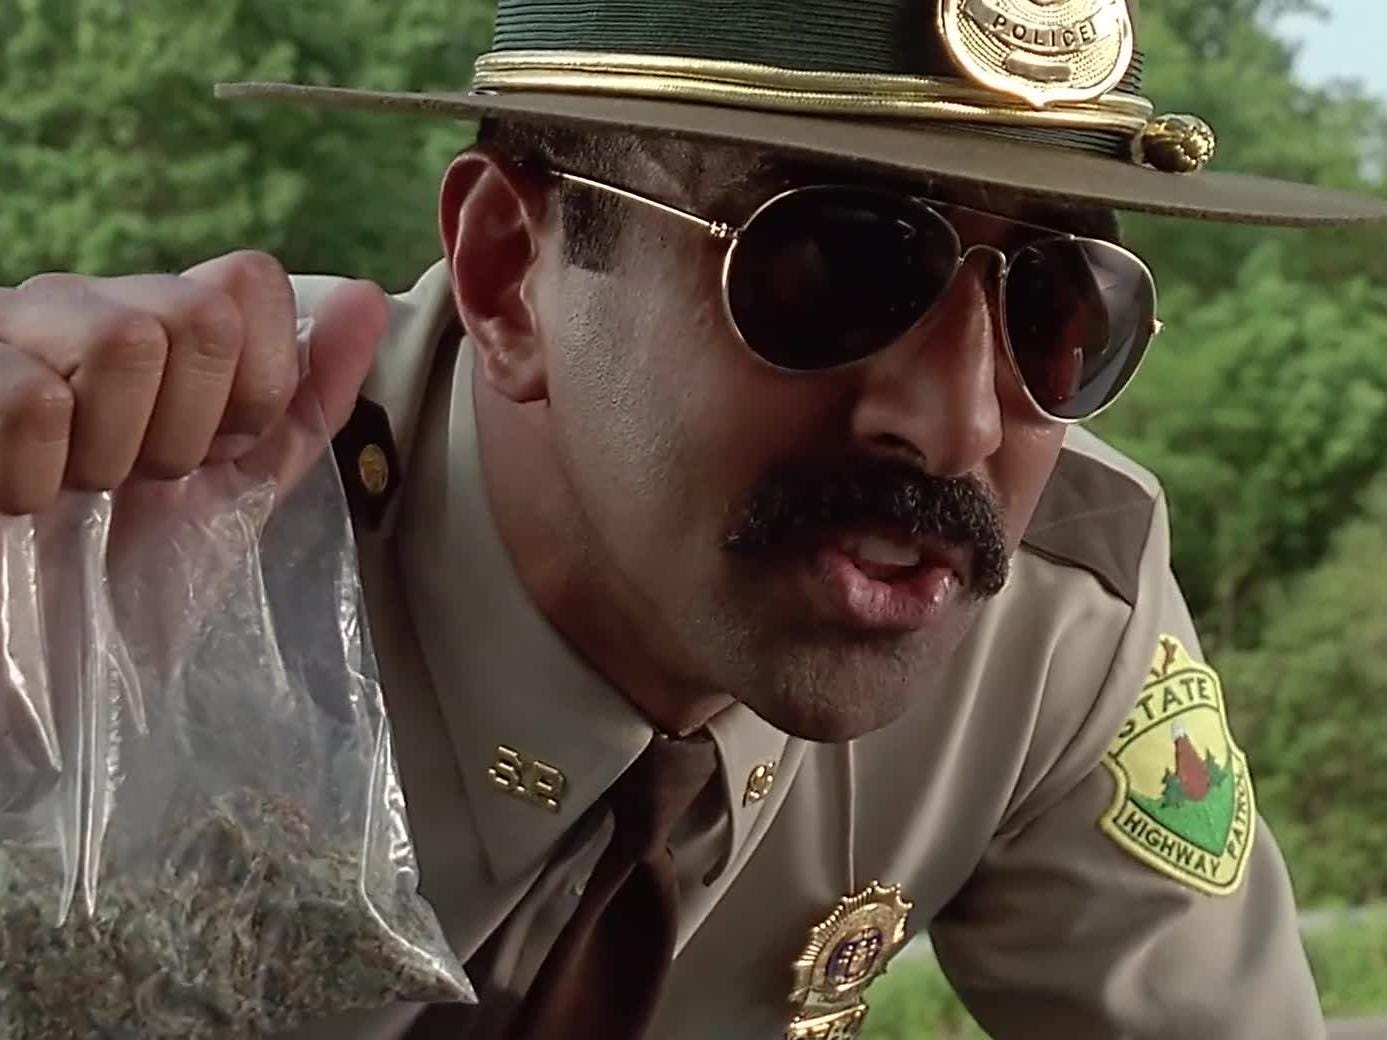 Littering and smoking the reefer. Now to teach you boys a lesson, me and  officer Rabbit..." - Super Troopers quote